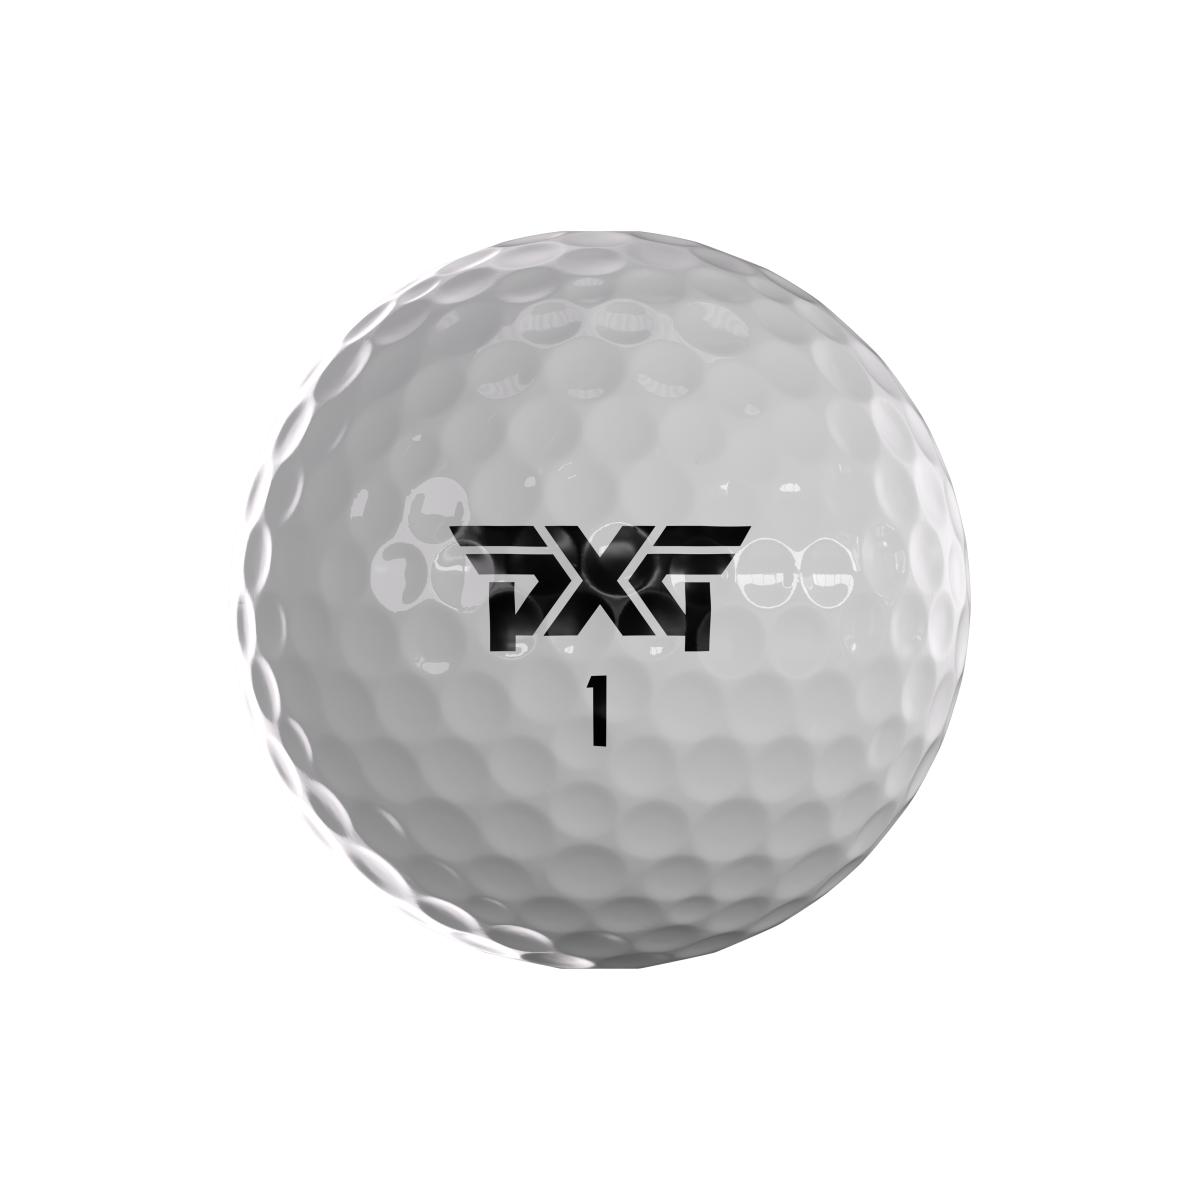 A product photograph shows PXG’s Xtreme golf ball.